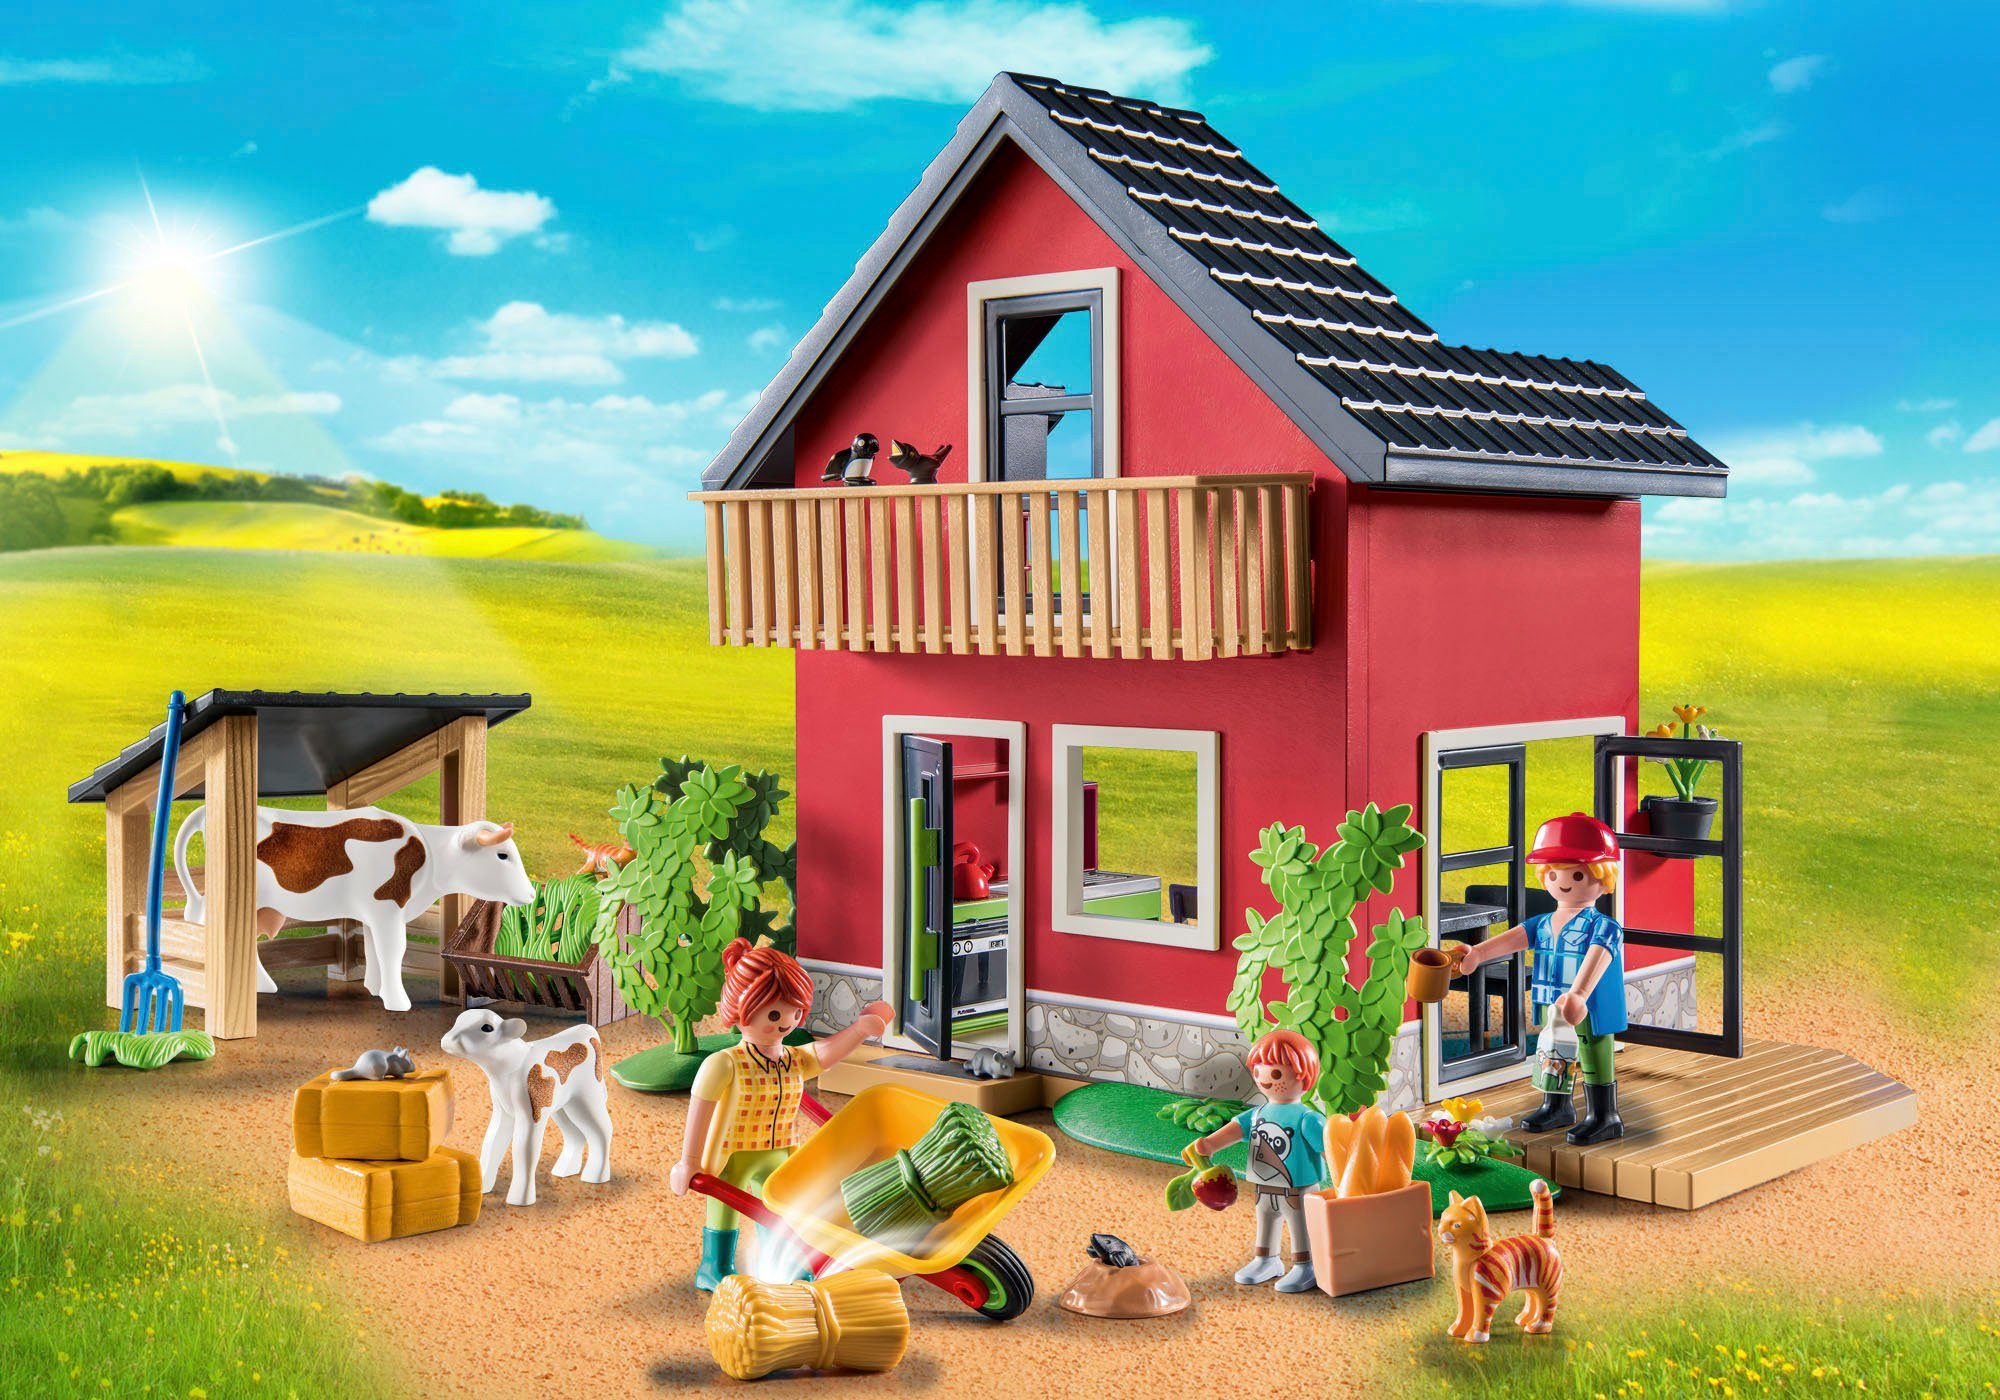 Playmobil® Konstruktions-Spielset Bauernhaus (71248), Country, aus Material; Germany in Made recyceltem teilweise